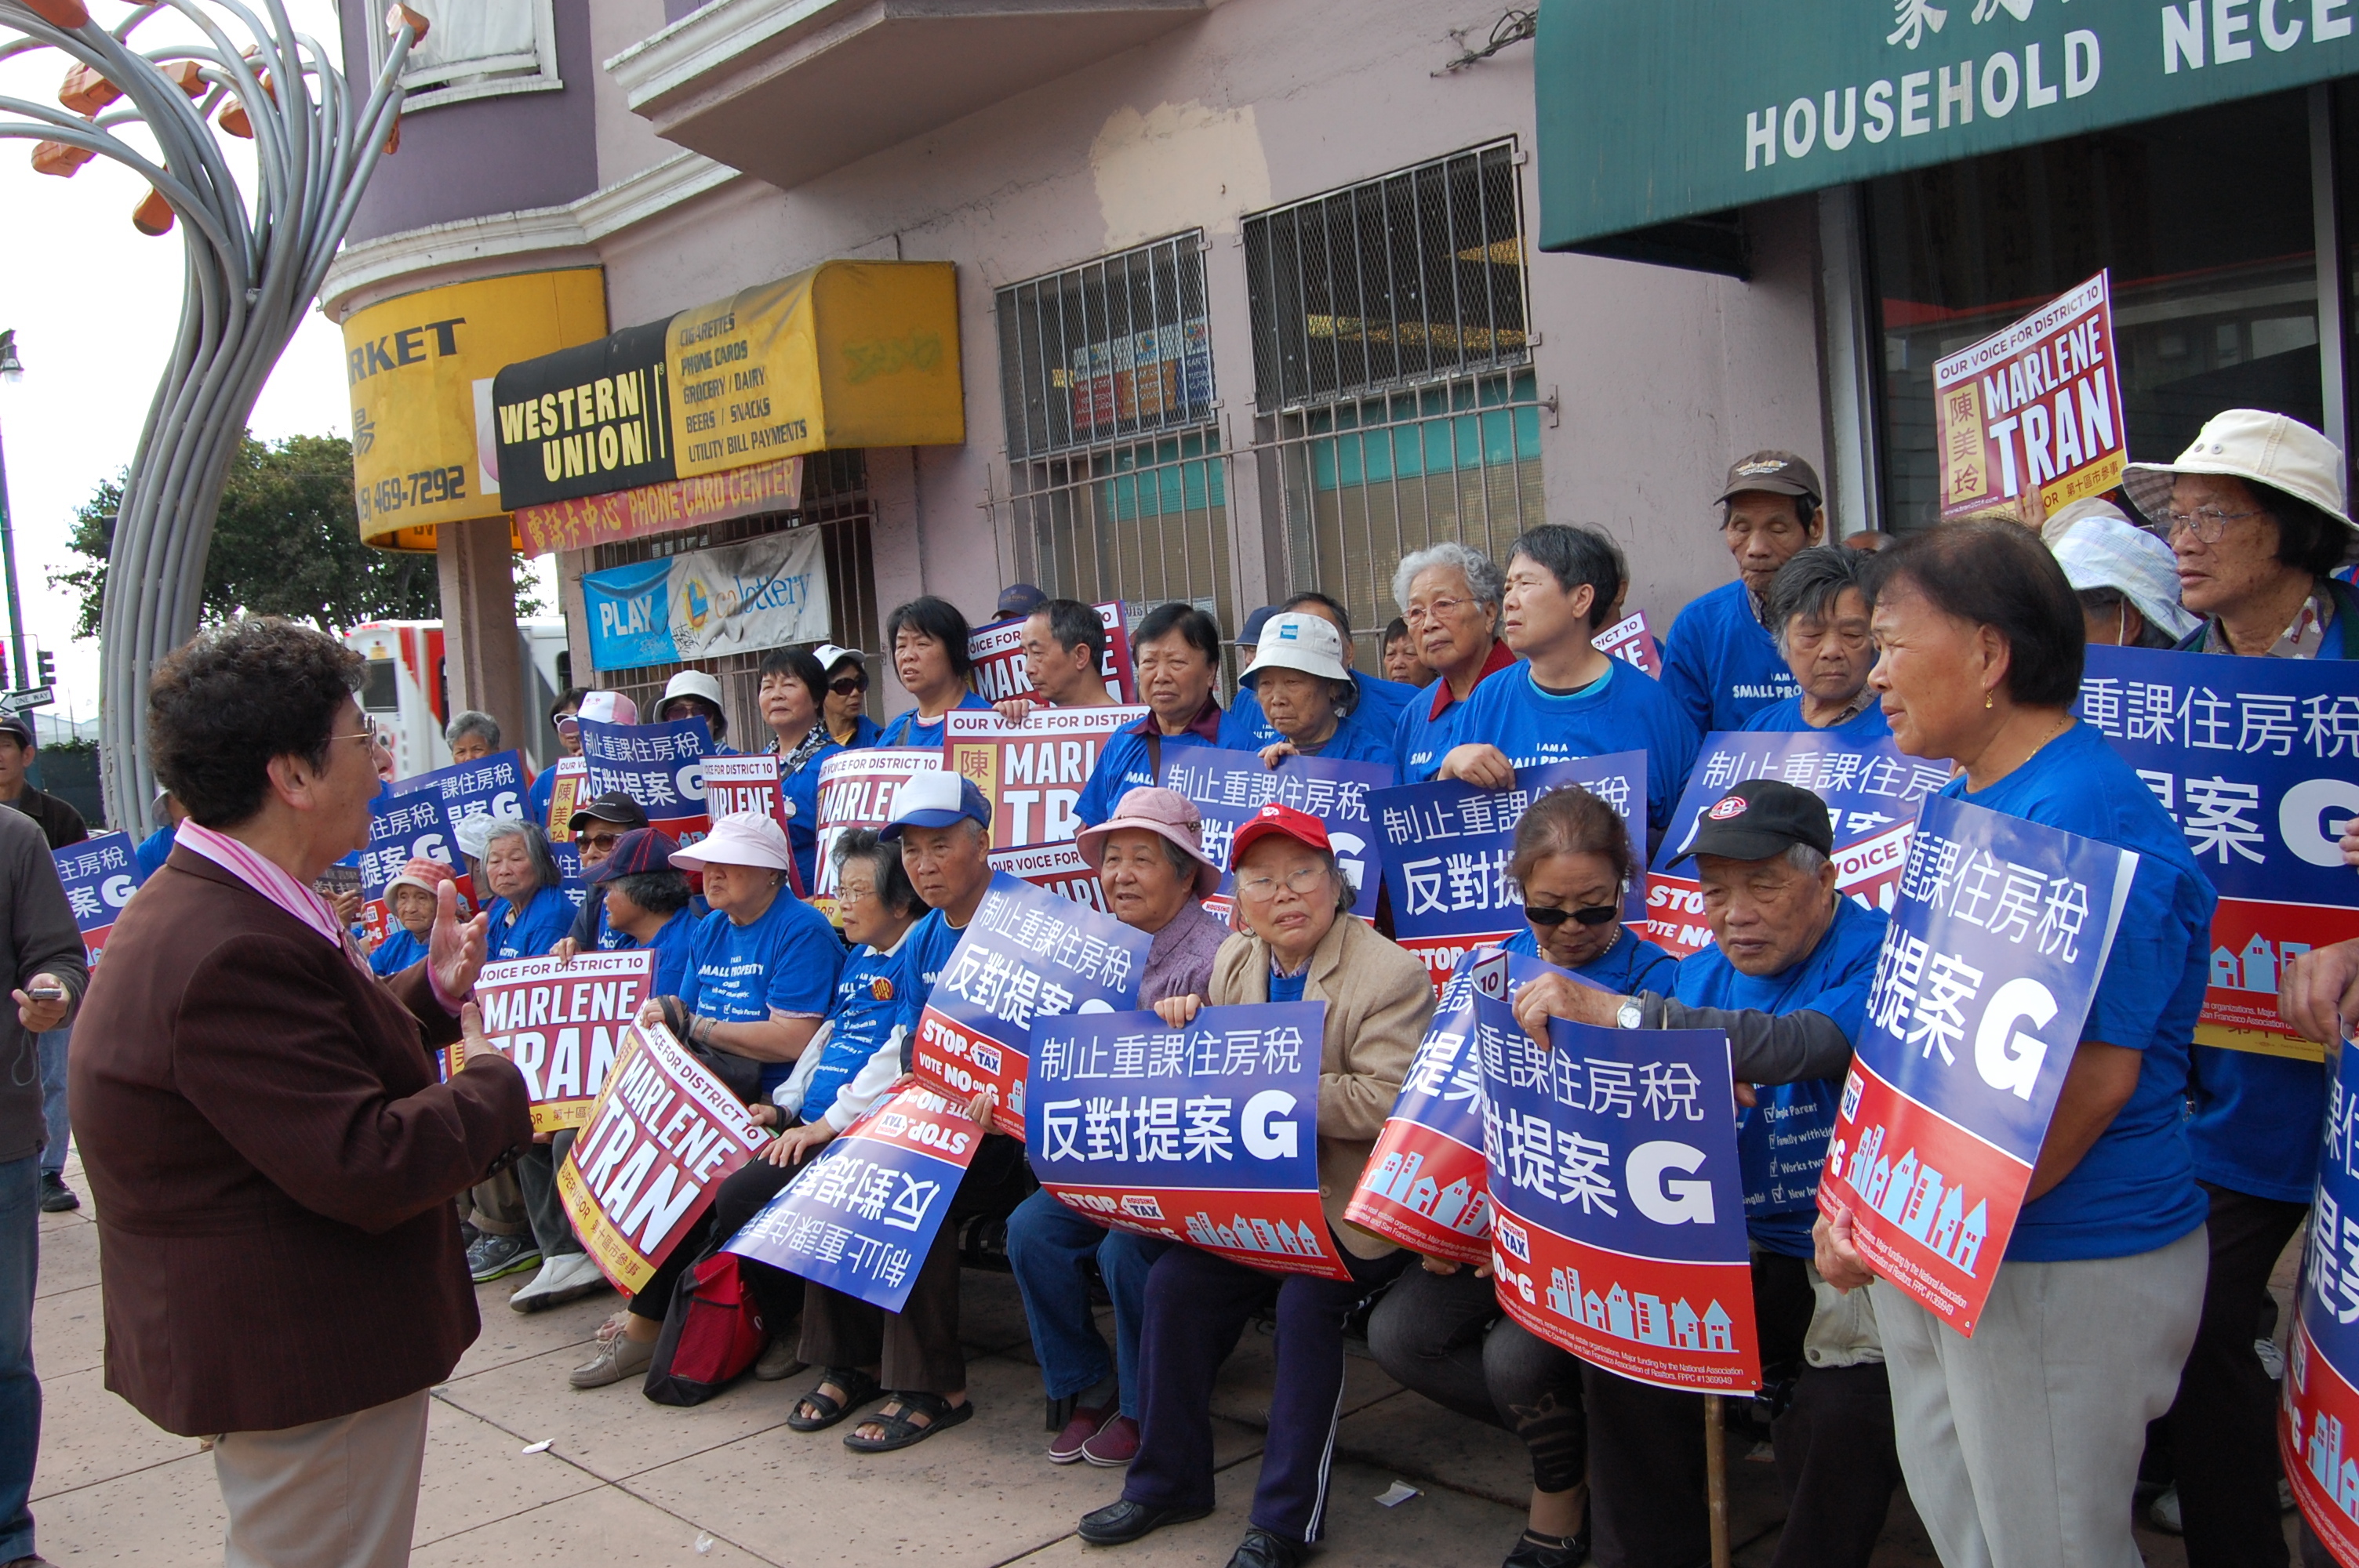 A group of elderly Asian people, holding political campaign signs, listen attentively to a speaker in an urban setting.